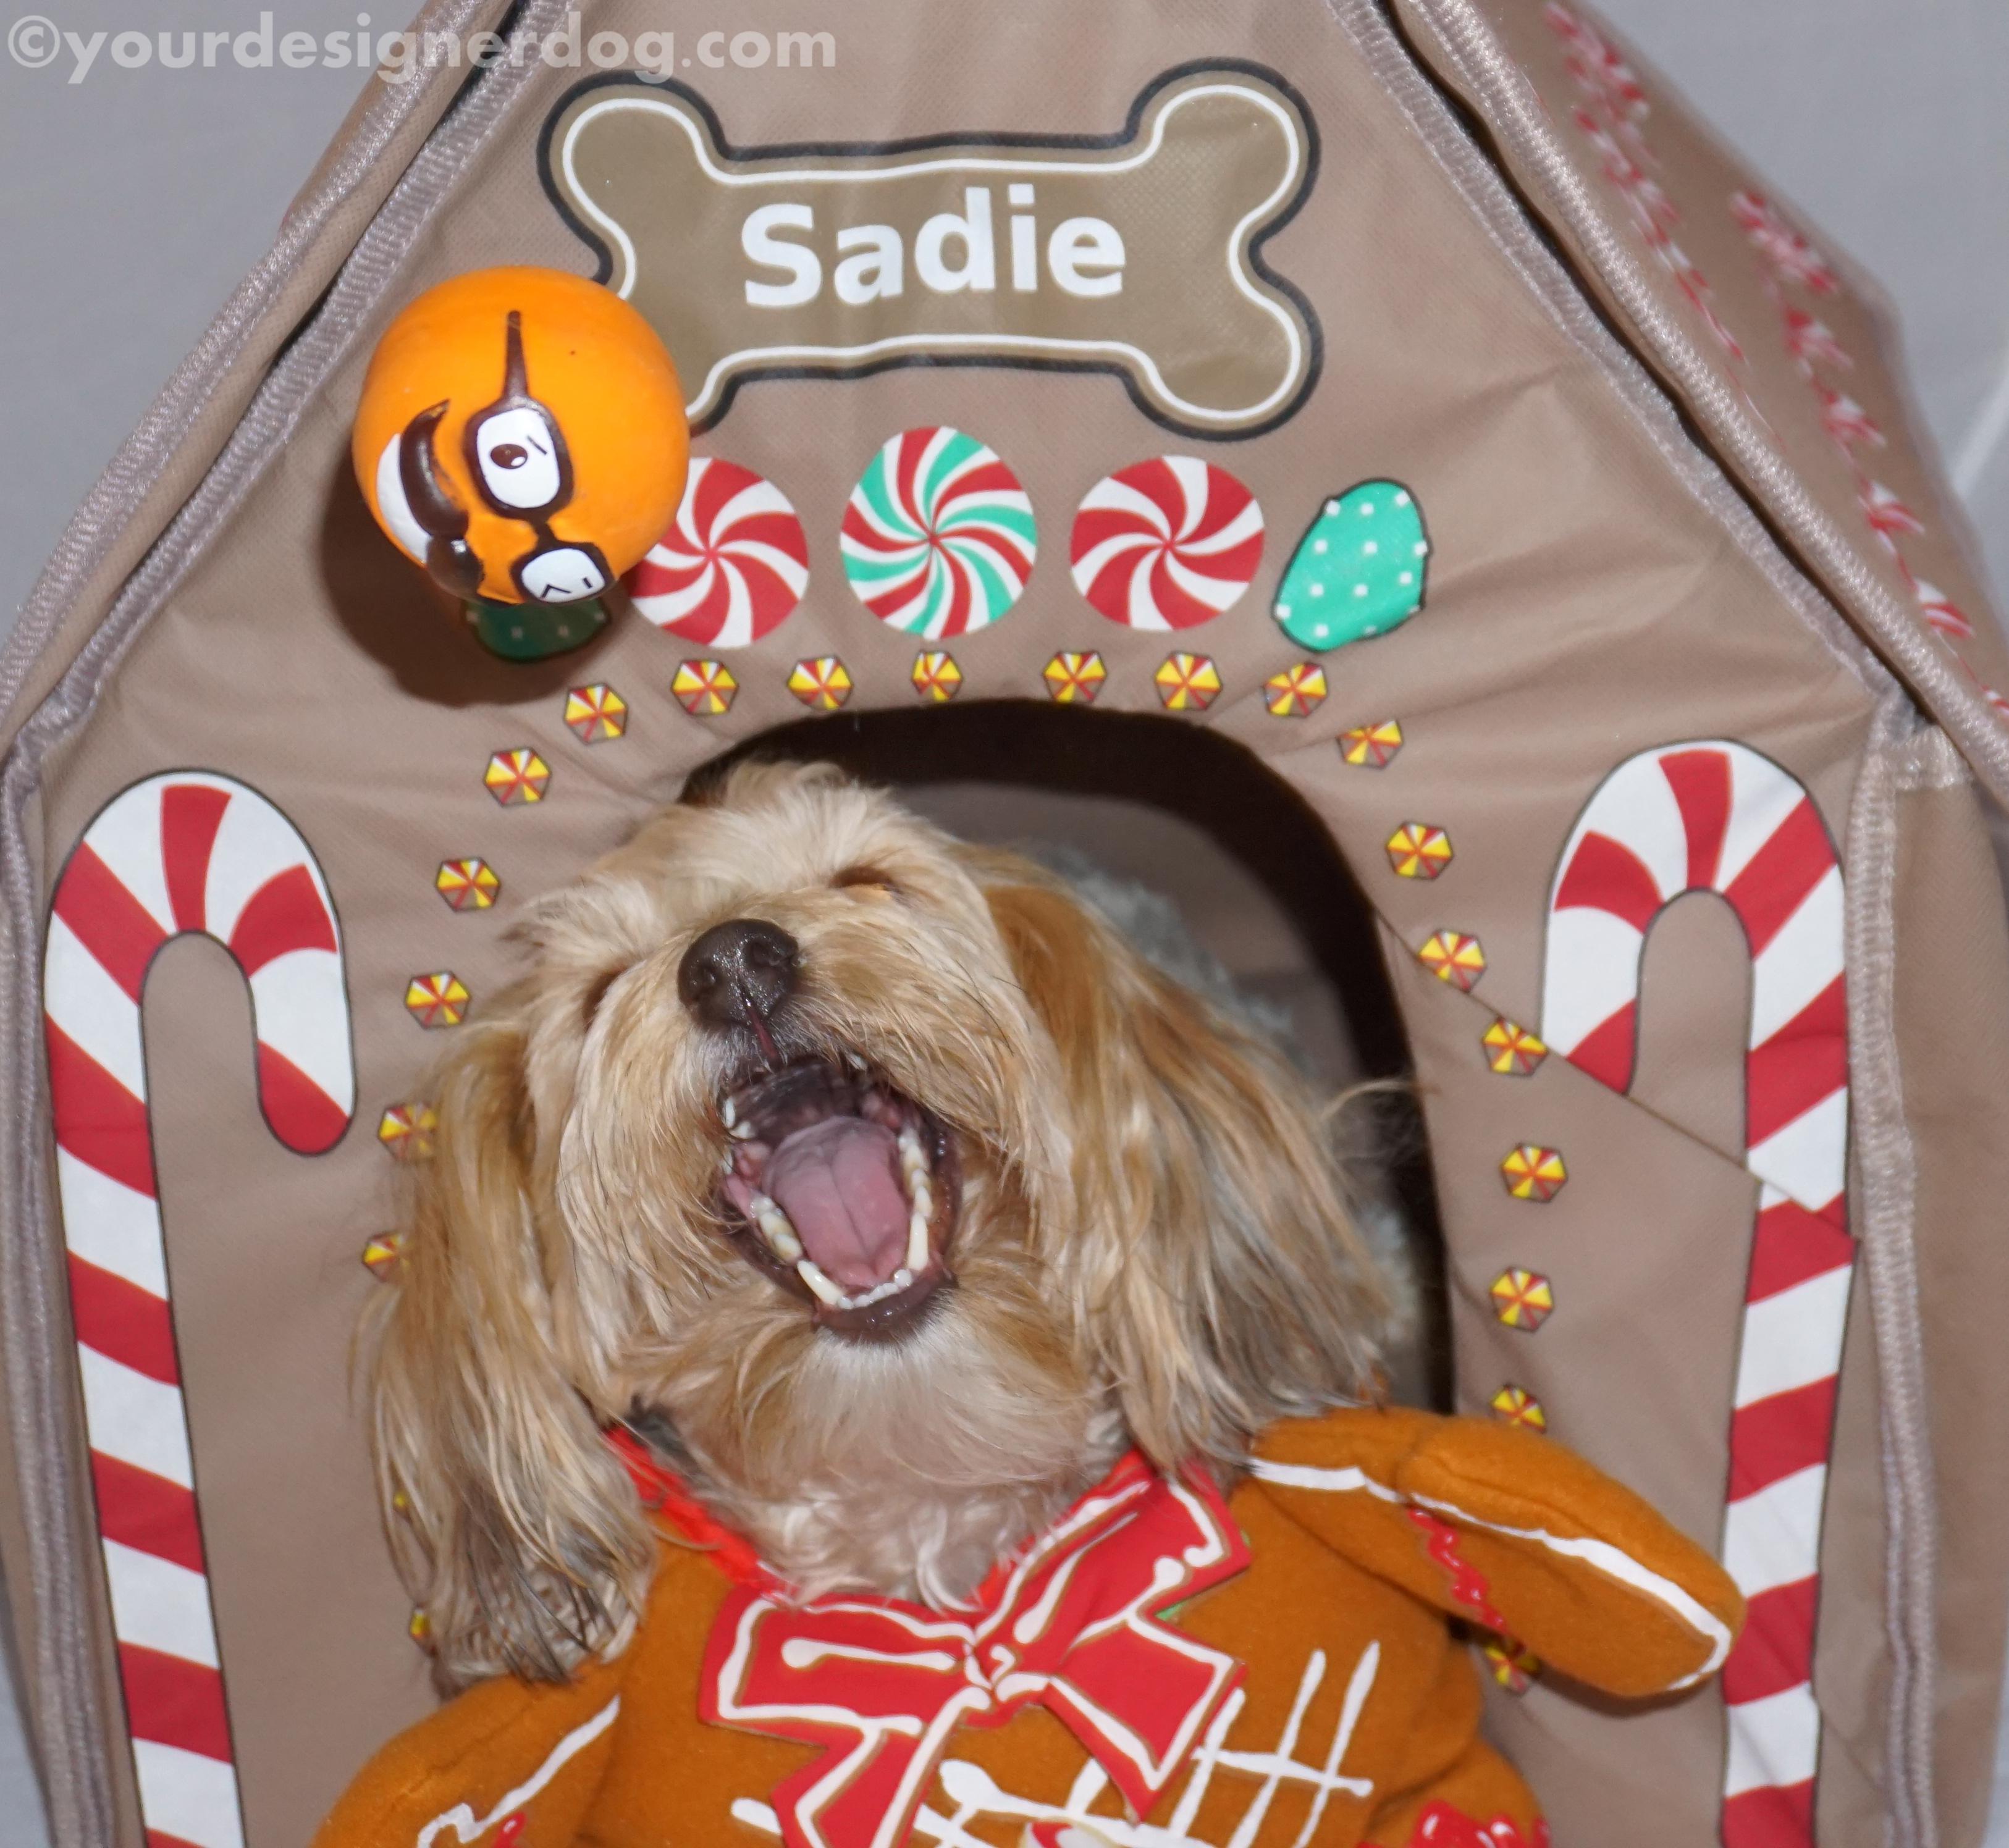 dogs, designer dogs, yorkipoo, yorkie poo, catch, gingerbread house, chrsitmas